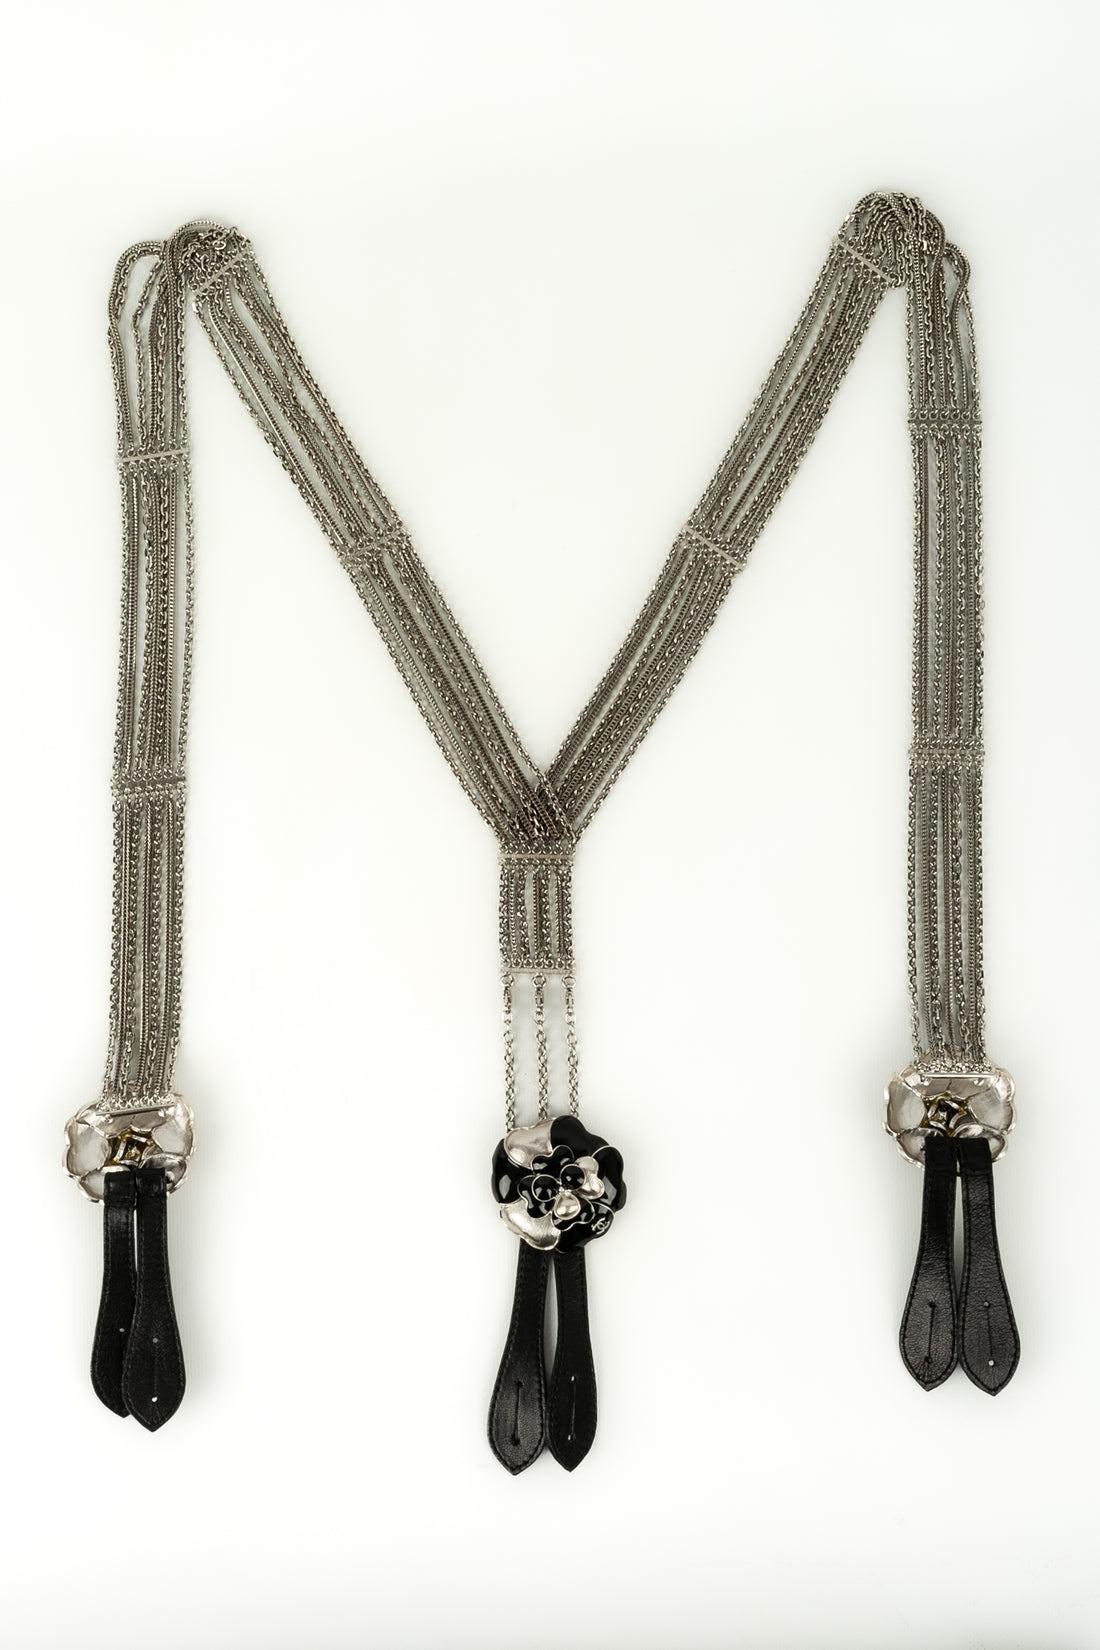 Chanel - Straps in silver chain, black leather and camellia in silver metal and black enamel. Spring-Summer 2007 collection.

Additional information:
Condition: Very good condition
Dimensions: Length front: 75 cm - Length back: 21 cm
Period: 21st